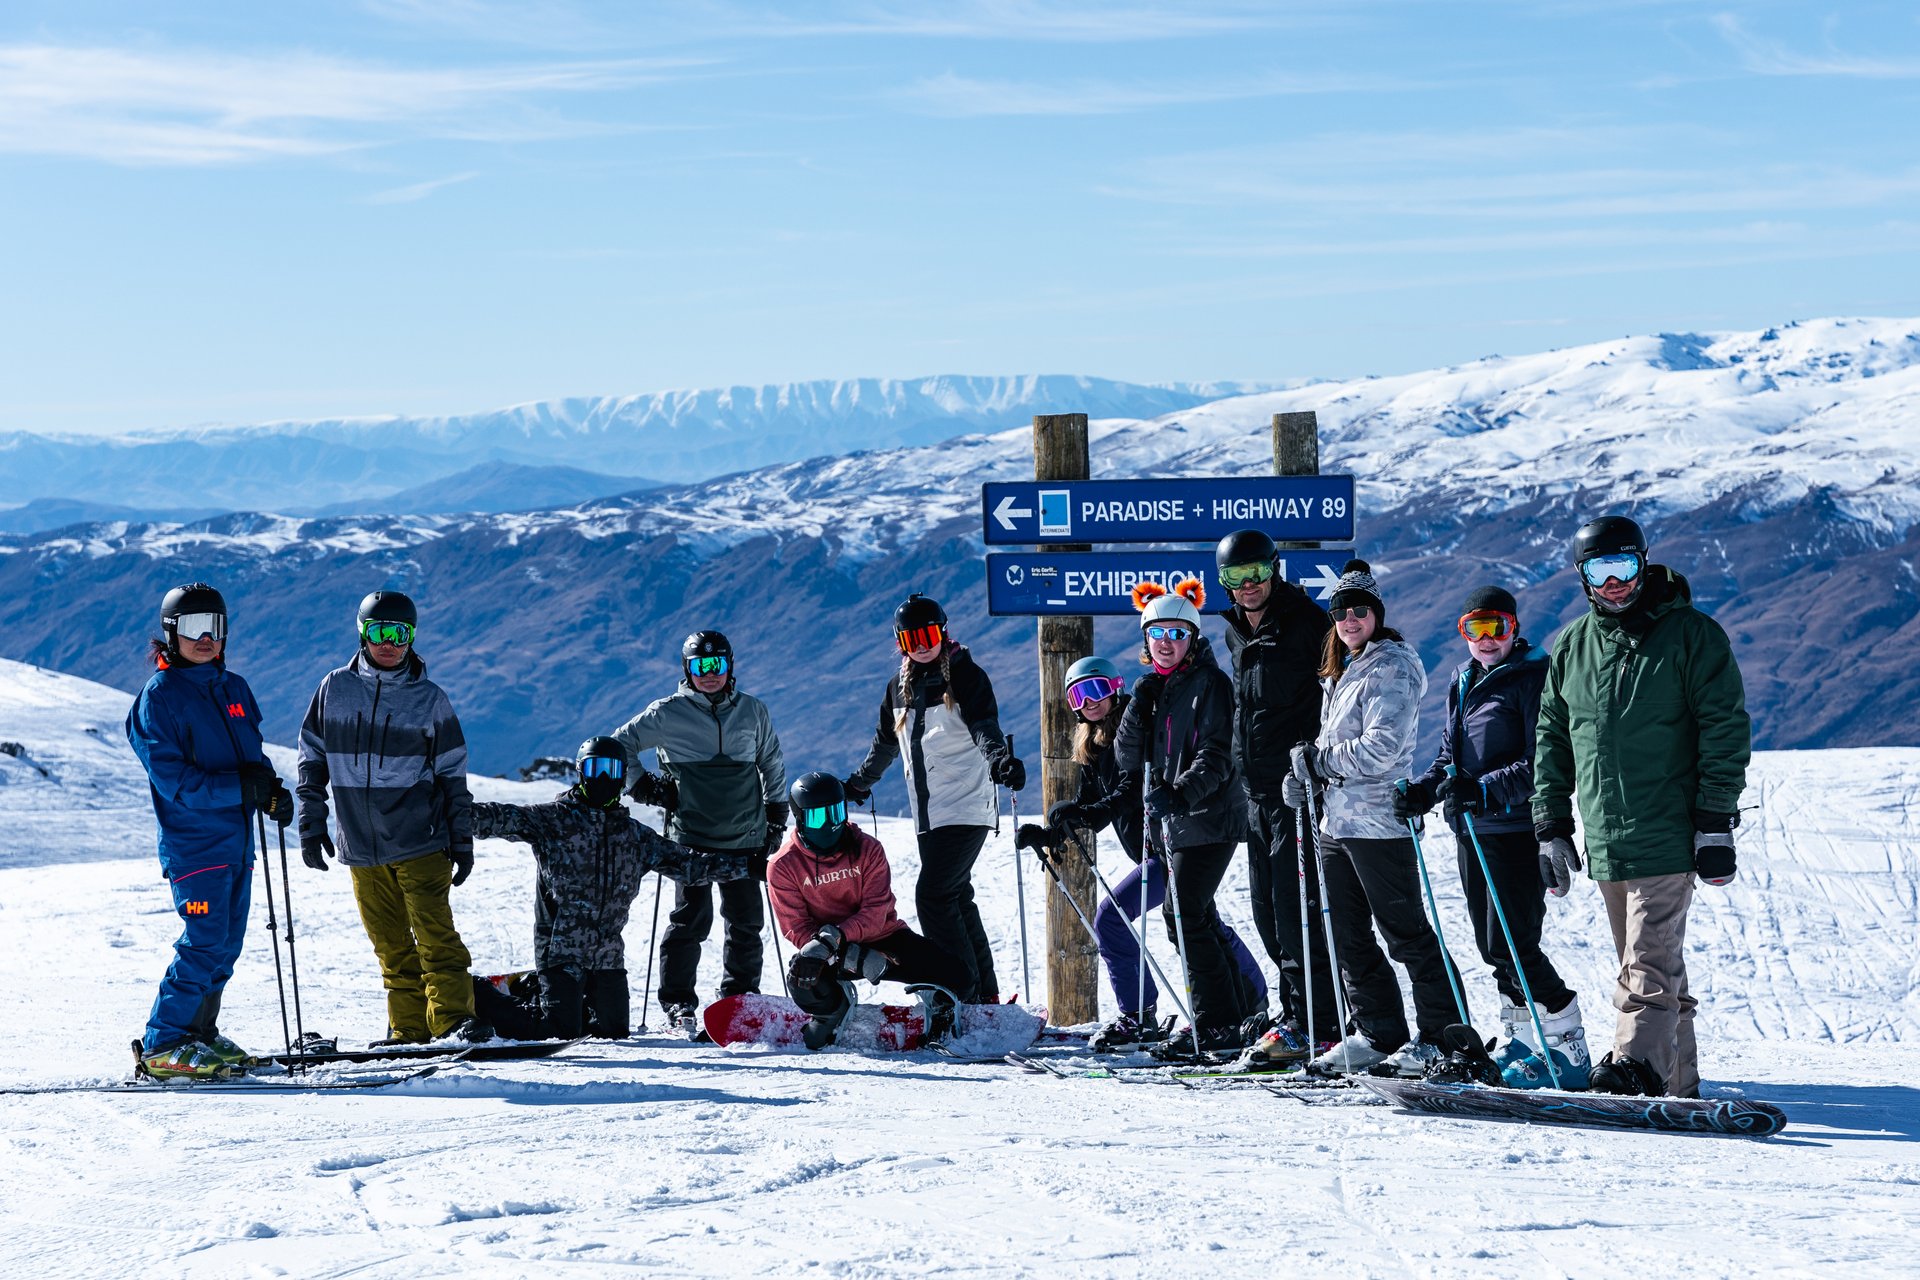 8-Day South Island Snow Safari from Christchurch: Six Mountains in Seven Days | A Day of Adventure in Queenstown | All Abilities Catered For: Beginners to Advanced | 